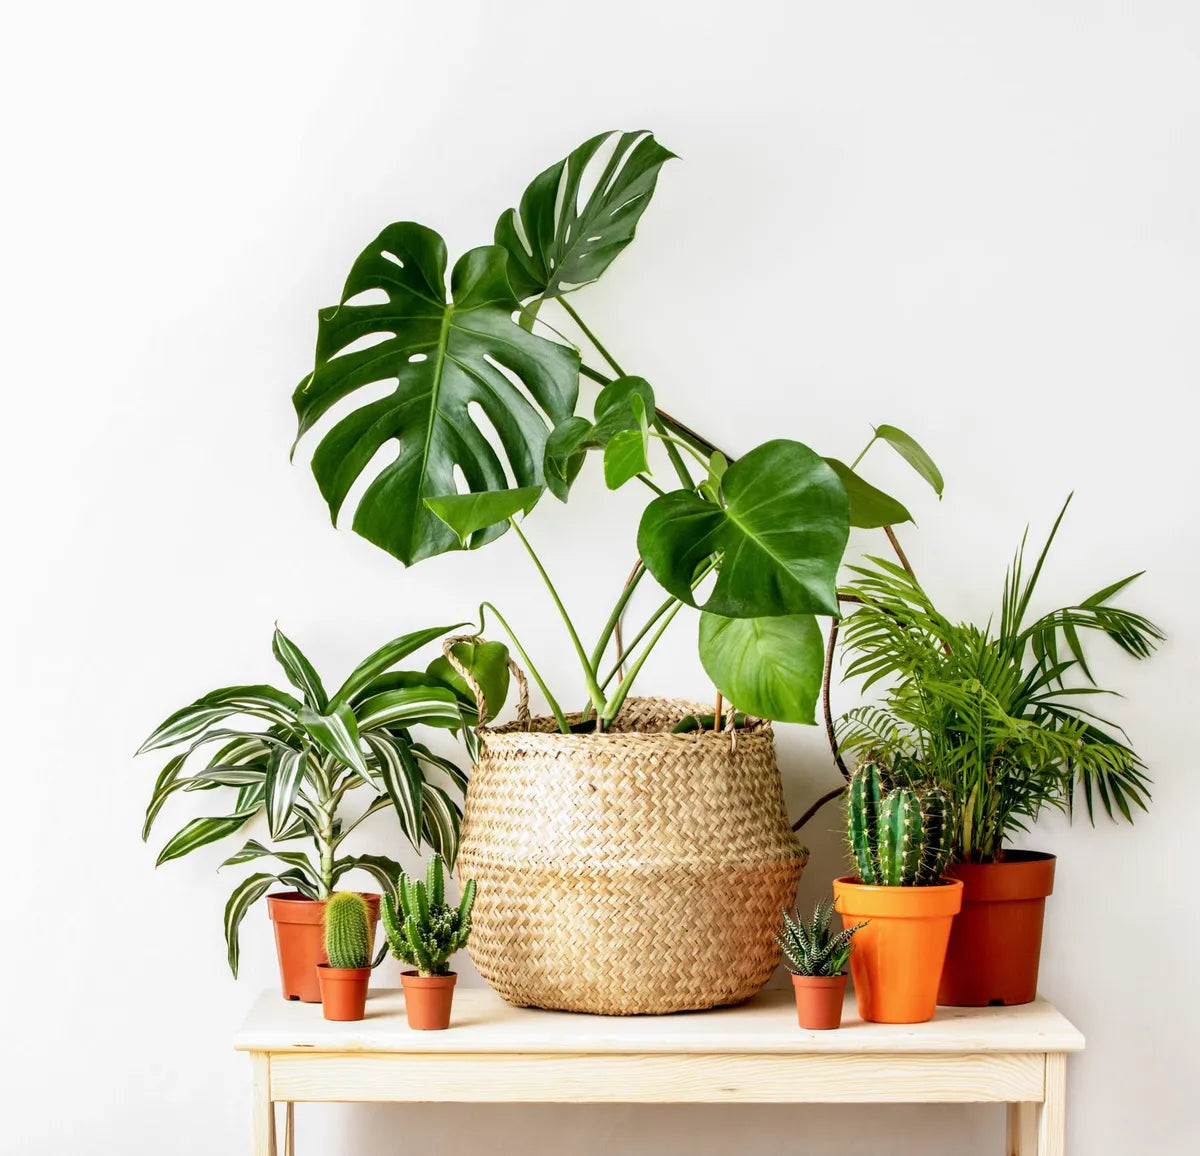 4 Tips for Styling Indoor Plants